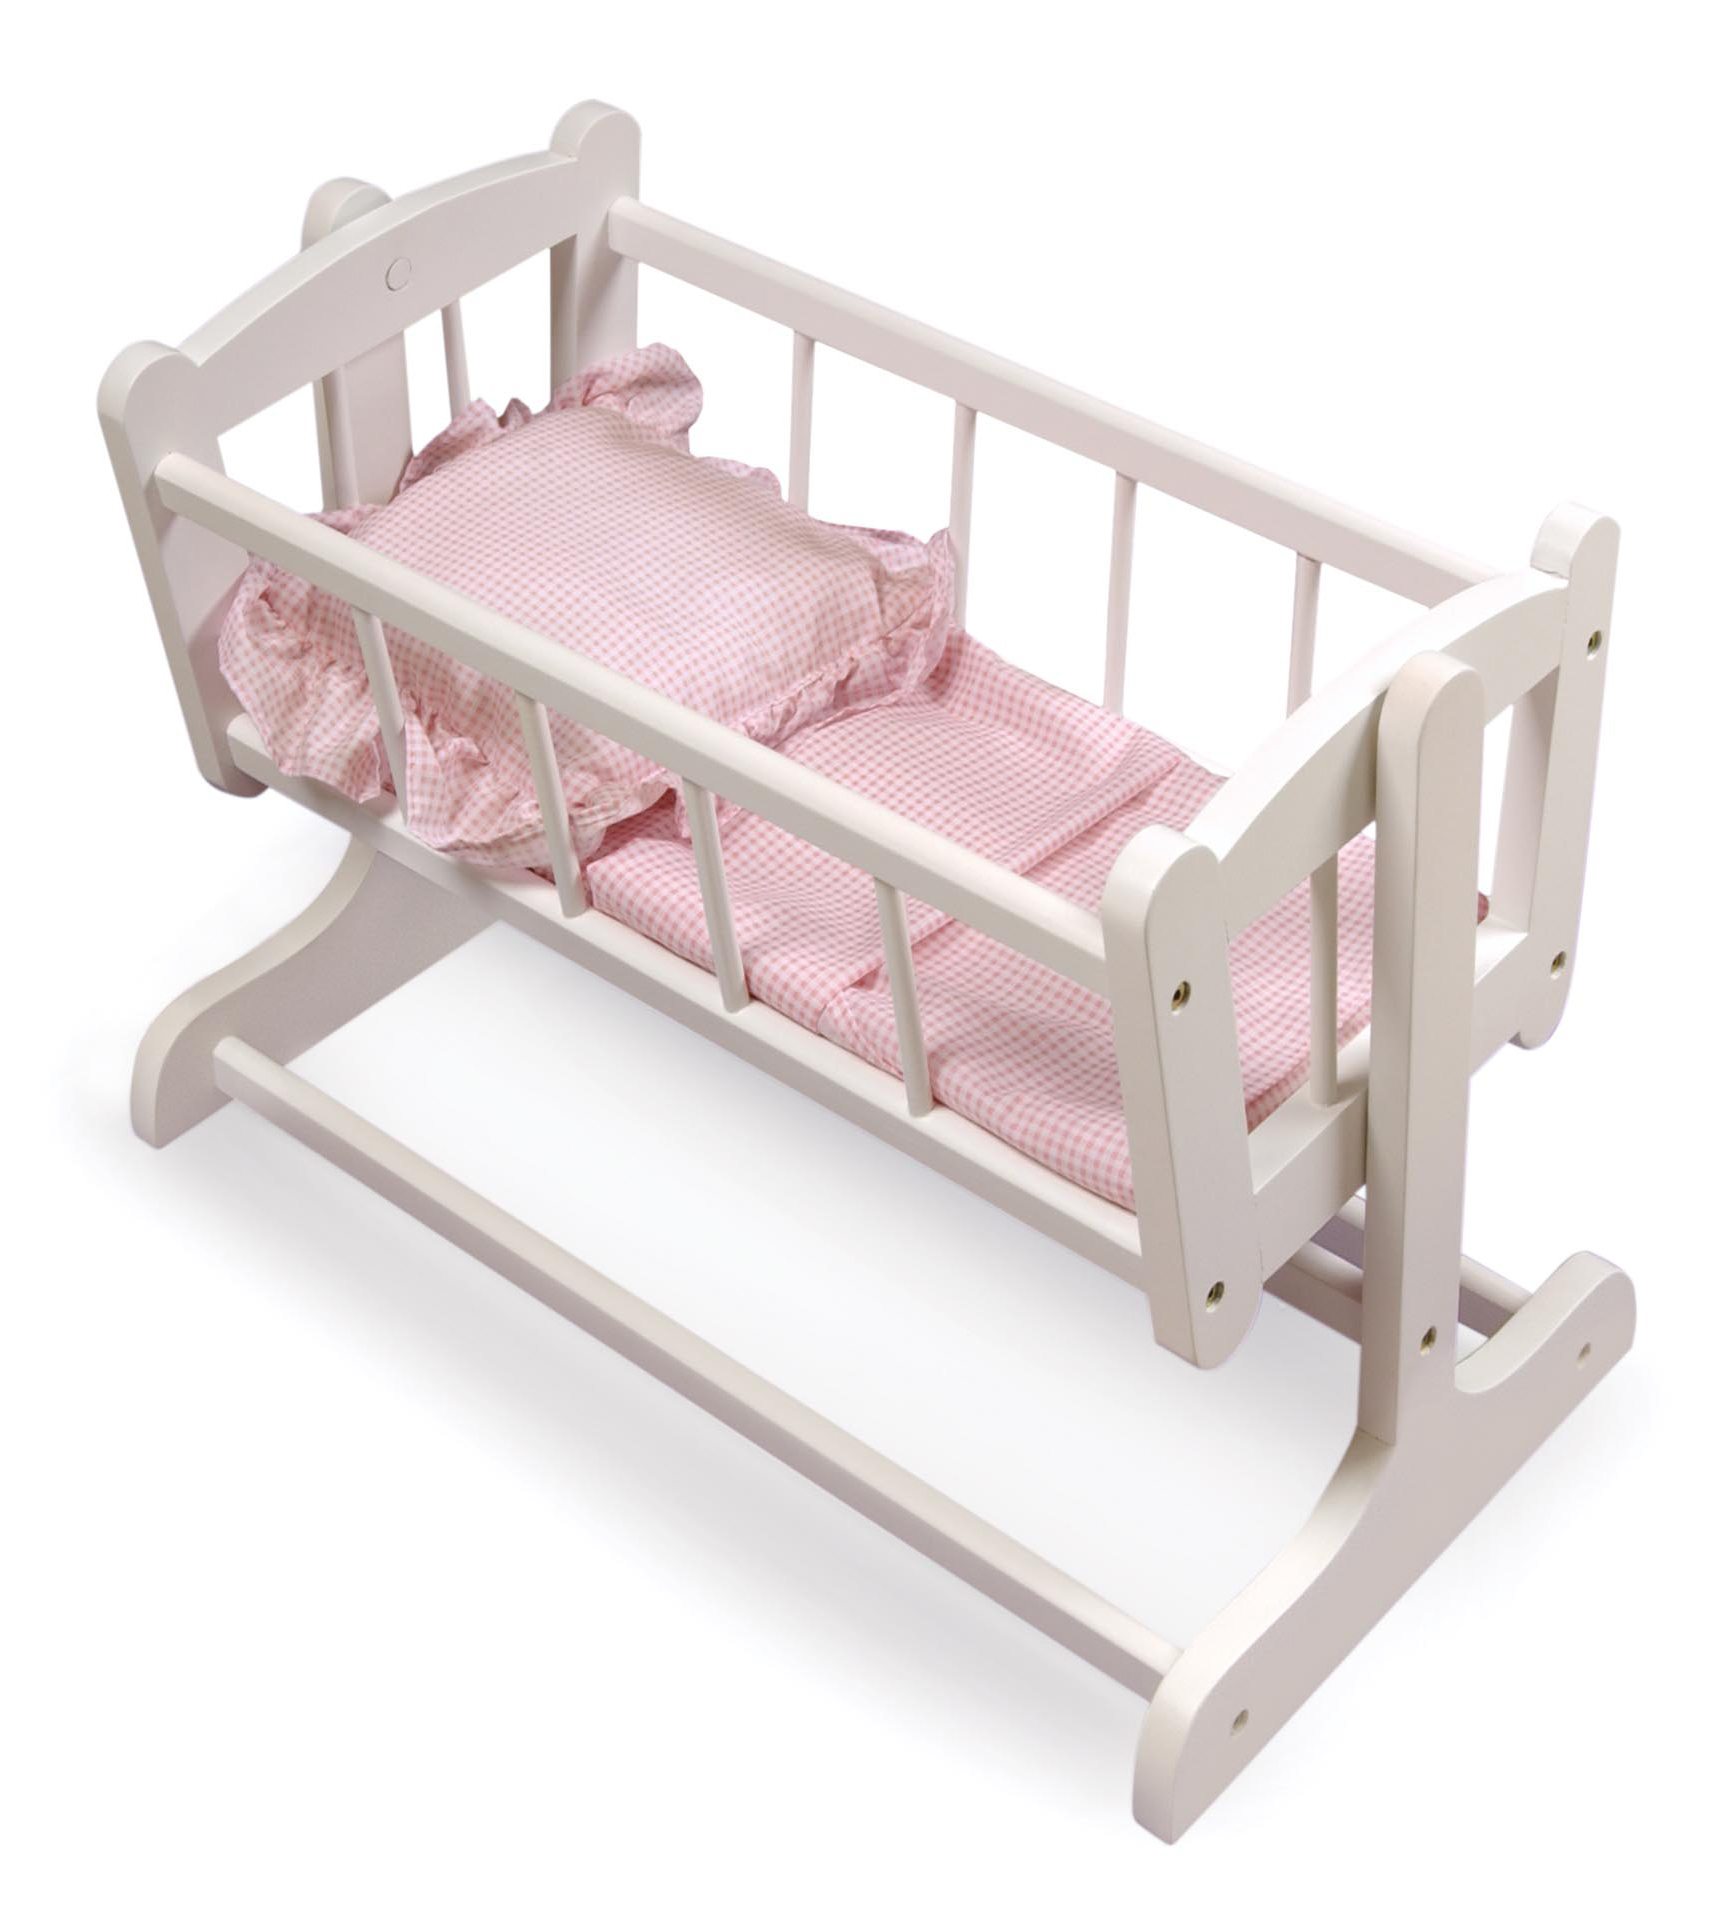 Heirloom Style Doll Cradle with Bedding - White/Pink